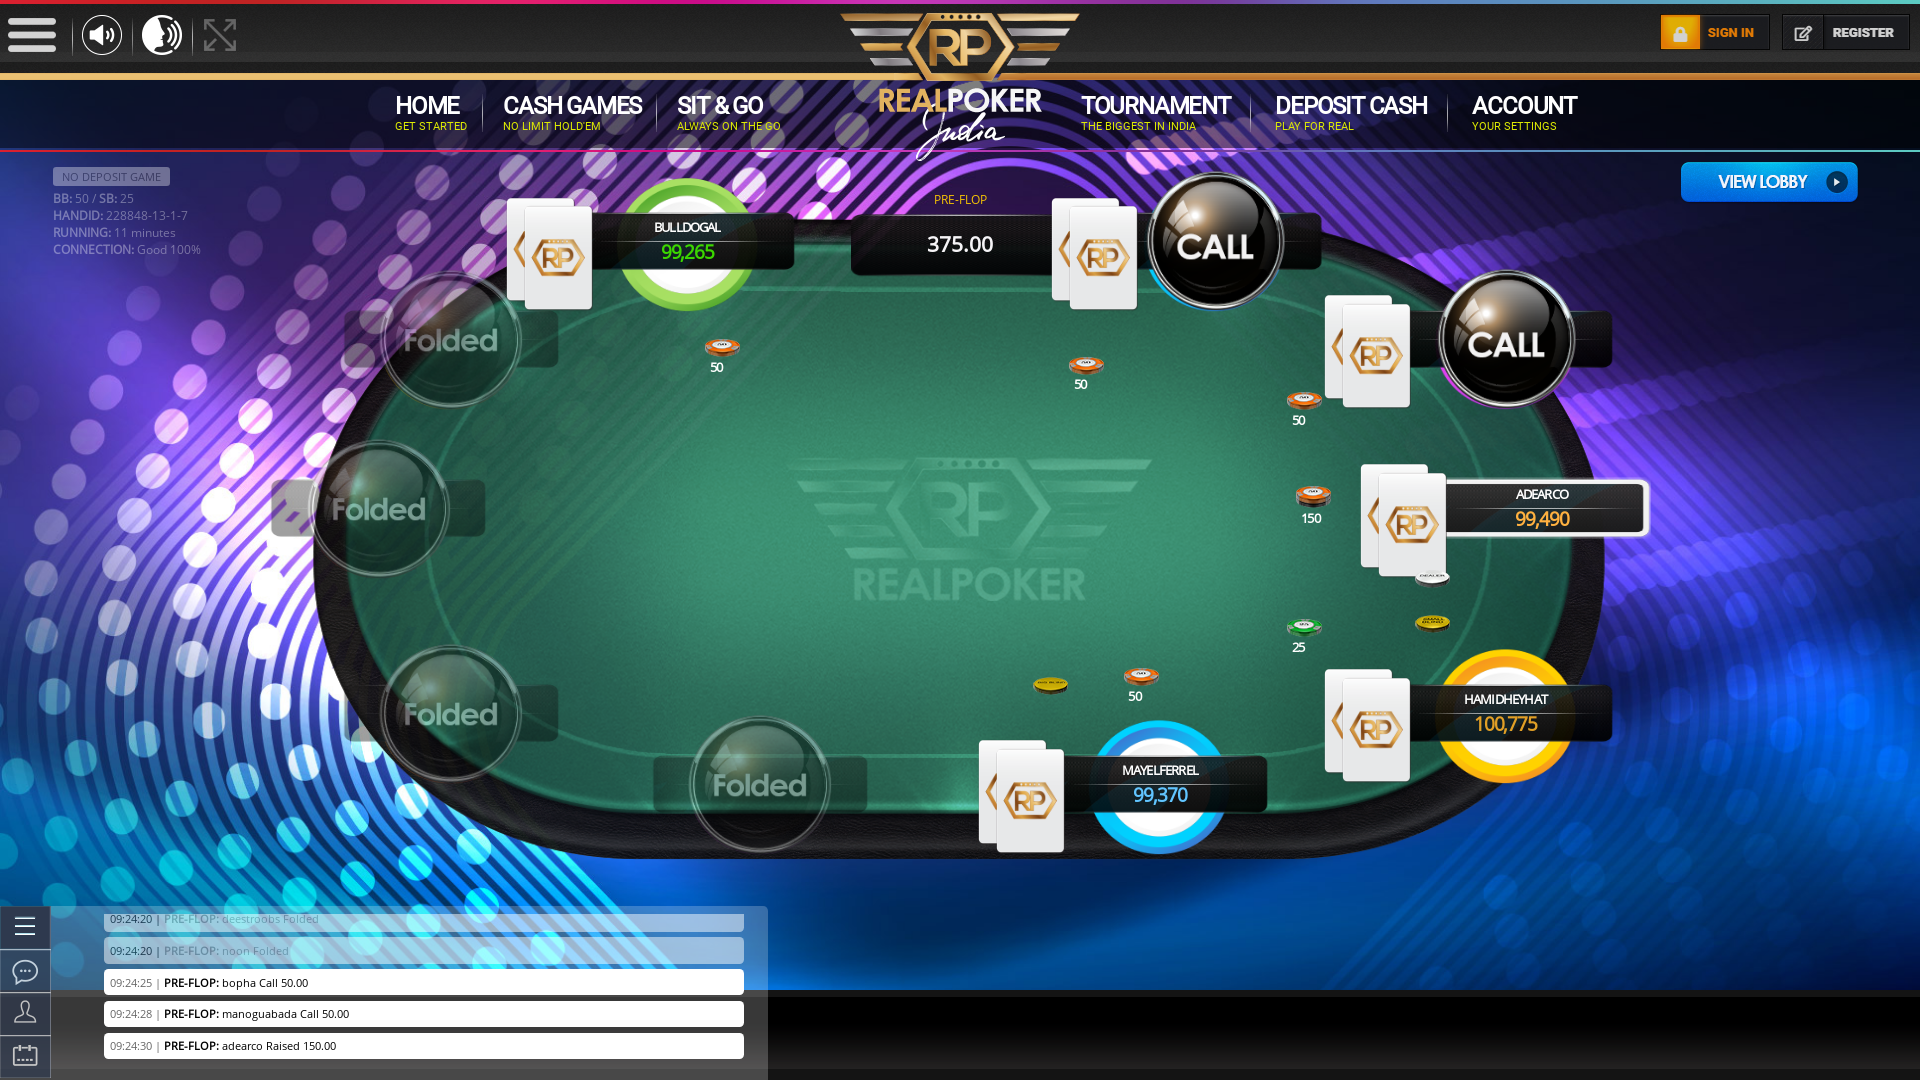 Mathikere, Bangalore online poker game on a 10 player table in the 11th minute of the game